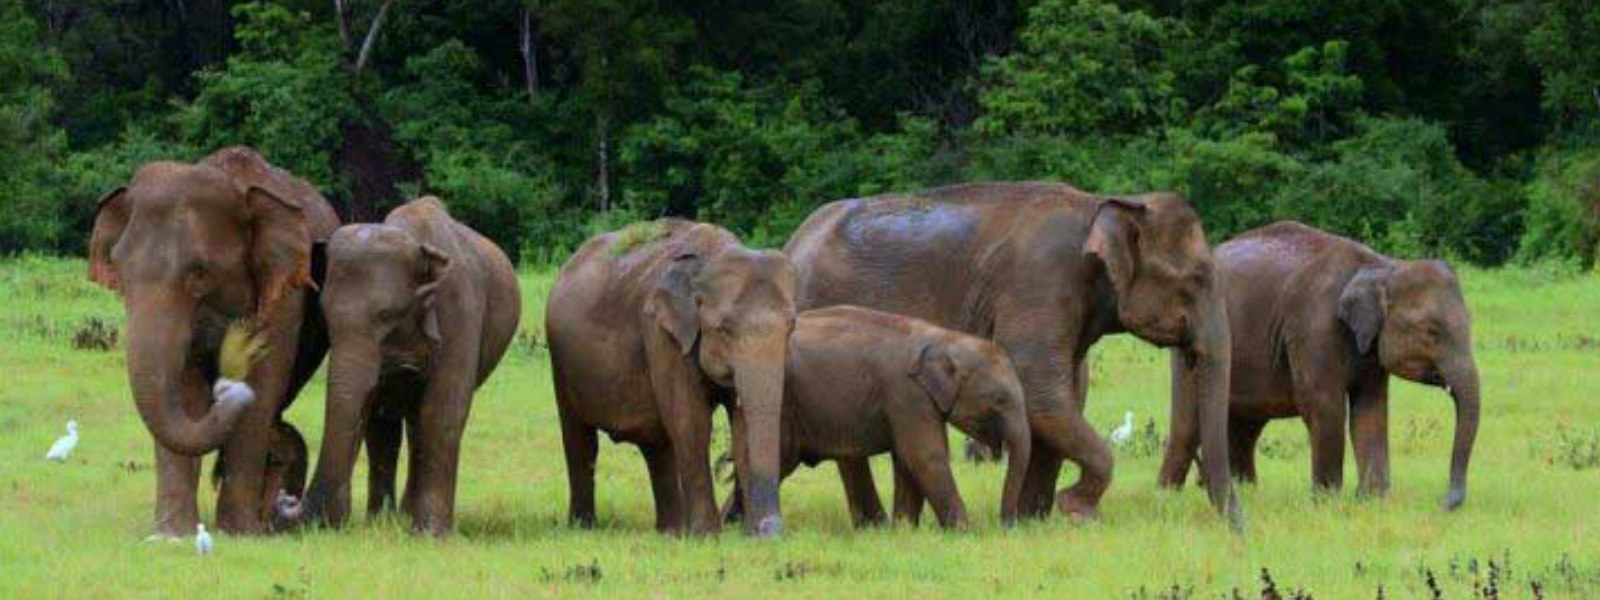 Stable habitats required for elephants